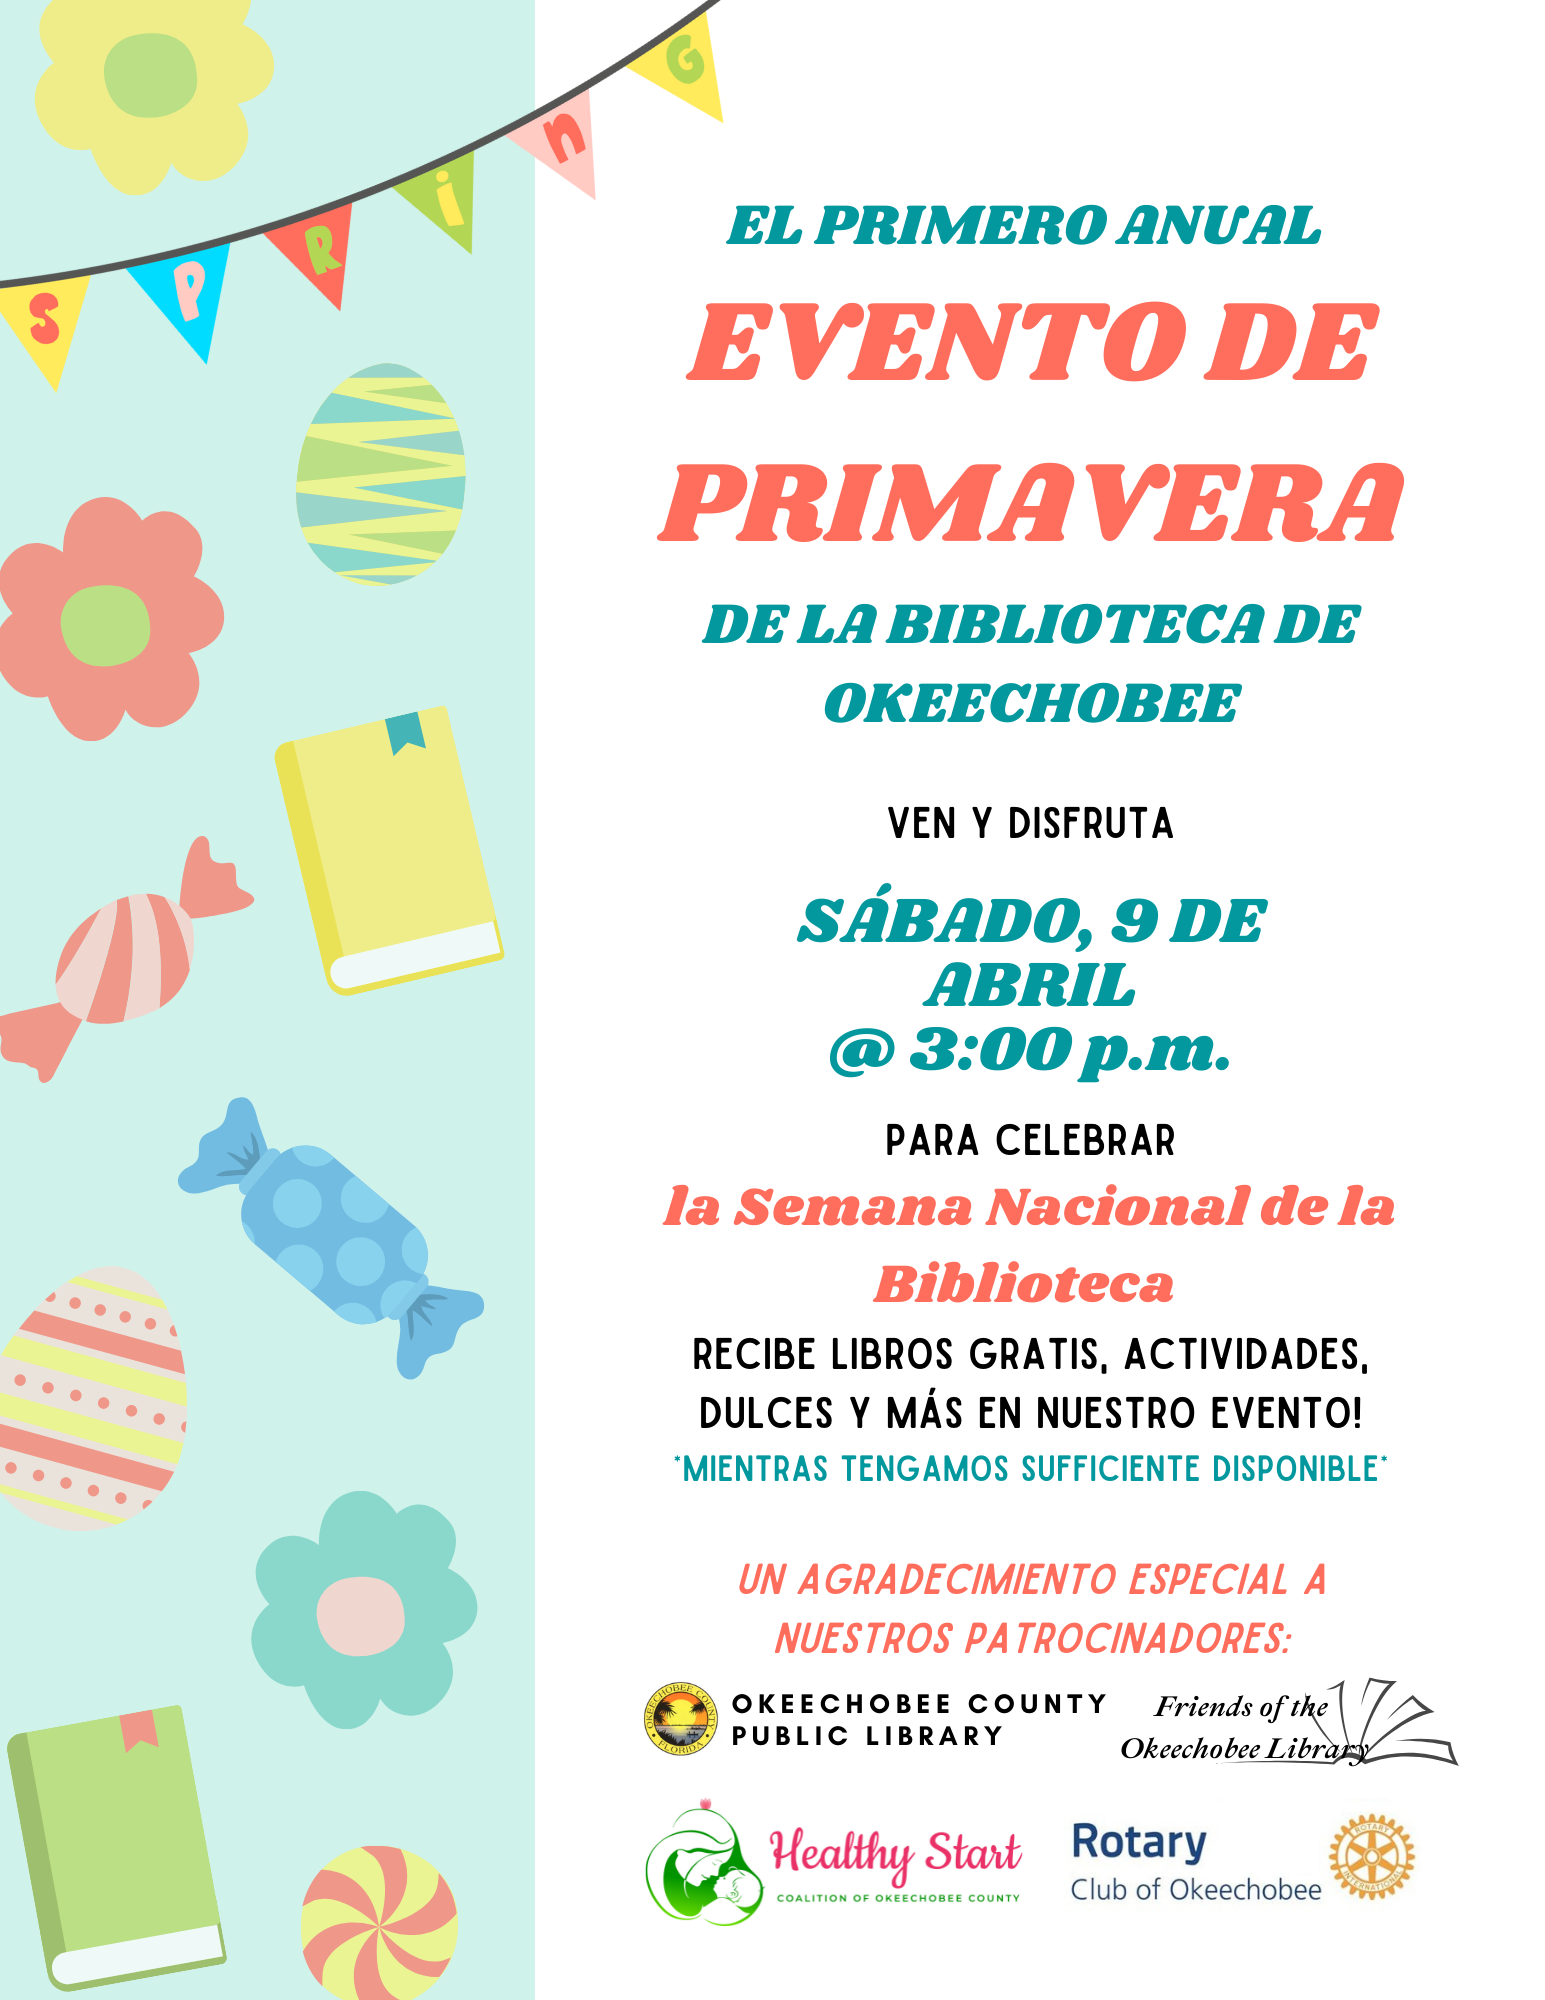 The Okeechobee Library will be holding our first annual Spring Drive Thru event to celebrate National Library Week on Saturday, April 9th @ 3:00 p.m! Come on by for FREE goodie bags, craft kits, books, and more that showcase our different materials and services for the community!